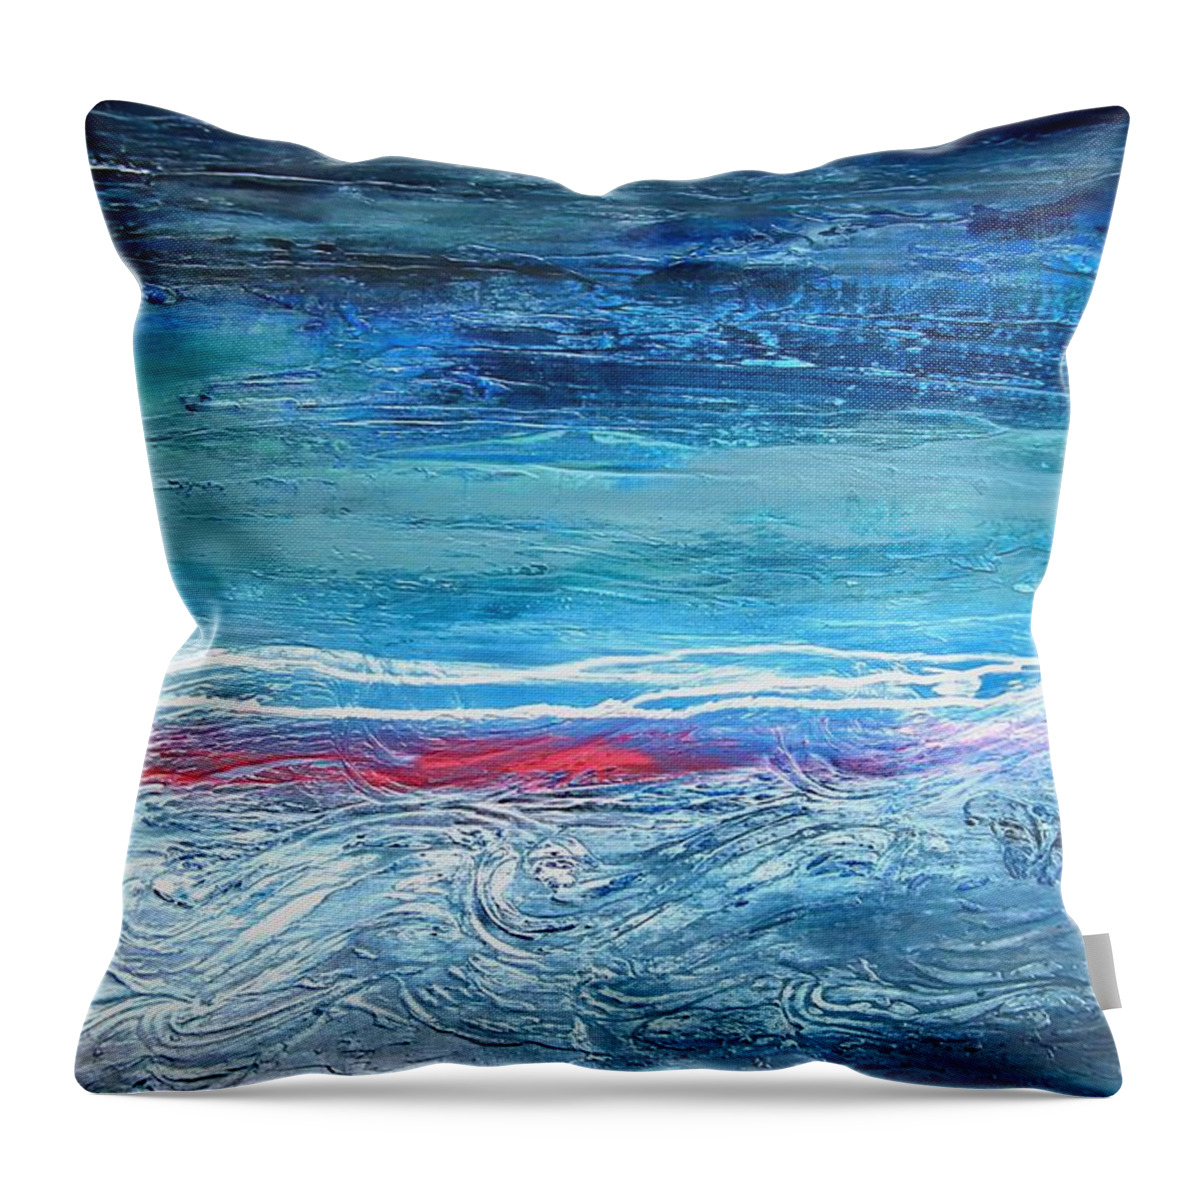 Art Throw Pillow featuring the painting Magnificent Morning Abstract Seascape by Kristen Abrahamson